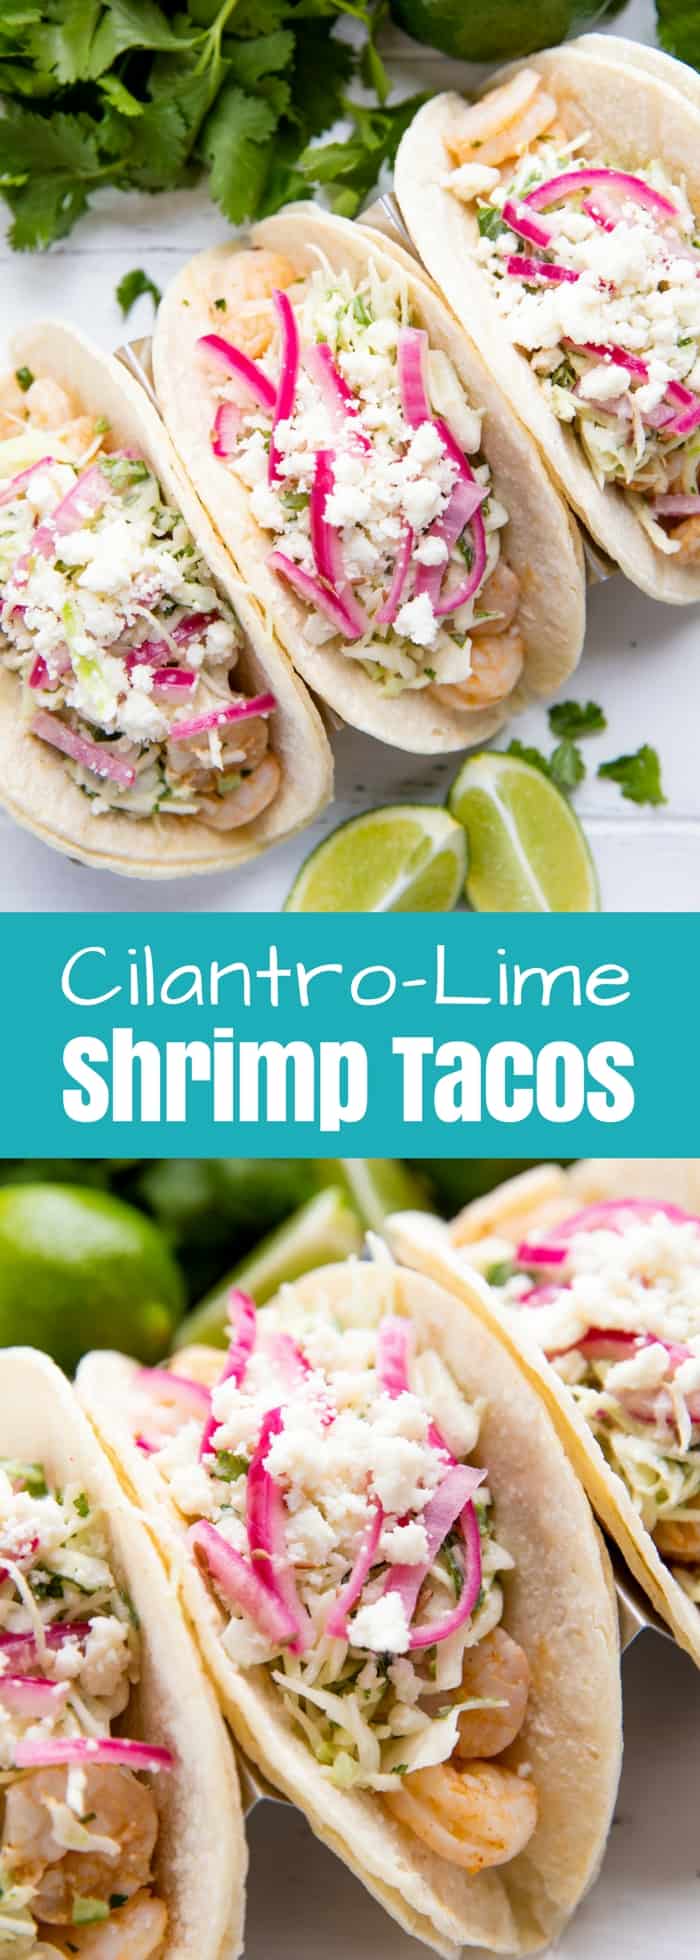 Cilantro-Lime Shrimp Tacos are full of flavor and come together in just 15 minutes! You'll love these easy shrimp taco recipe!